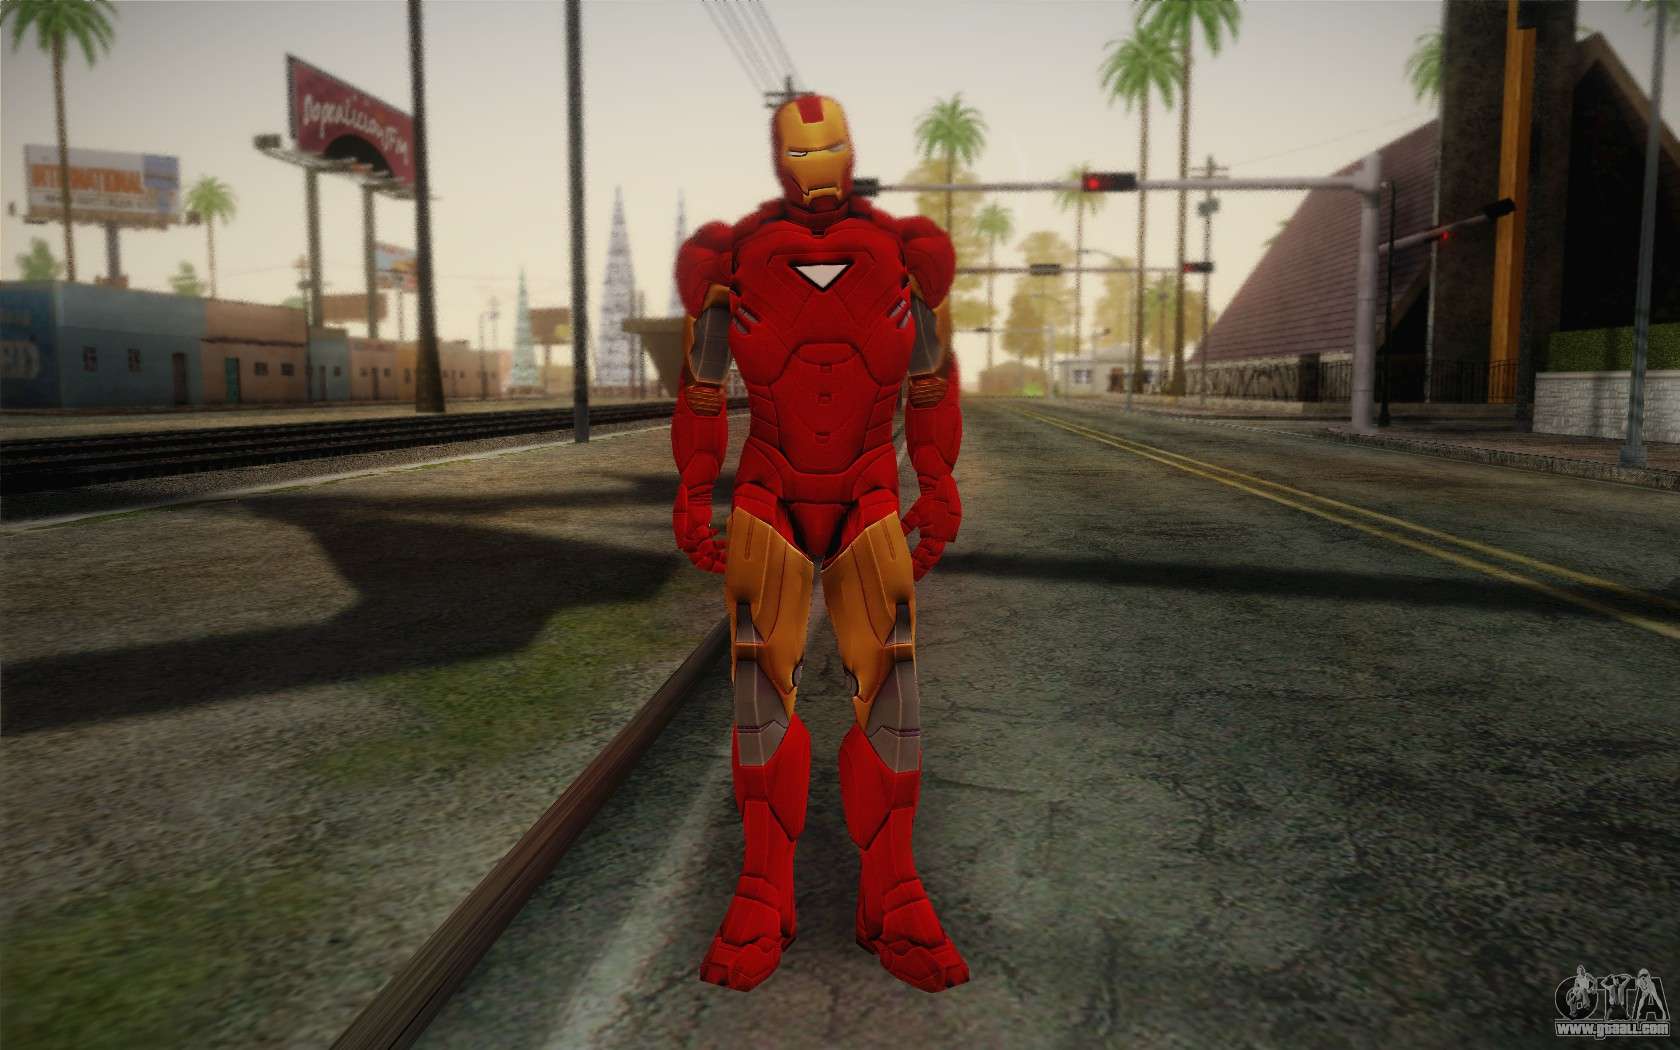 how to install iron man mod in gta san andreas pc